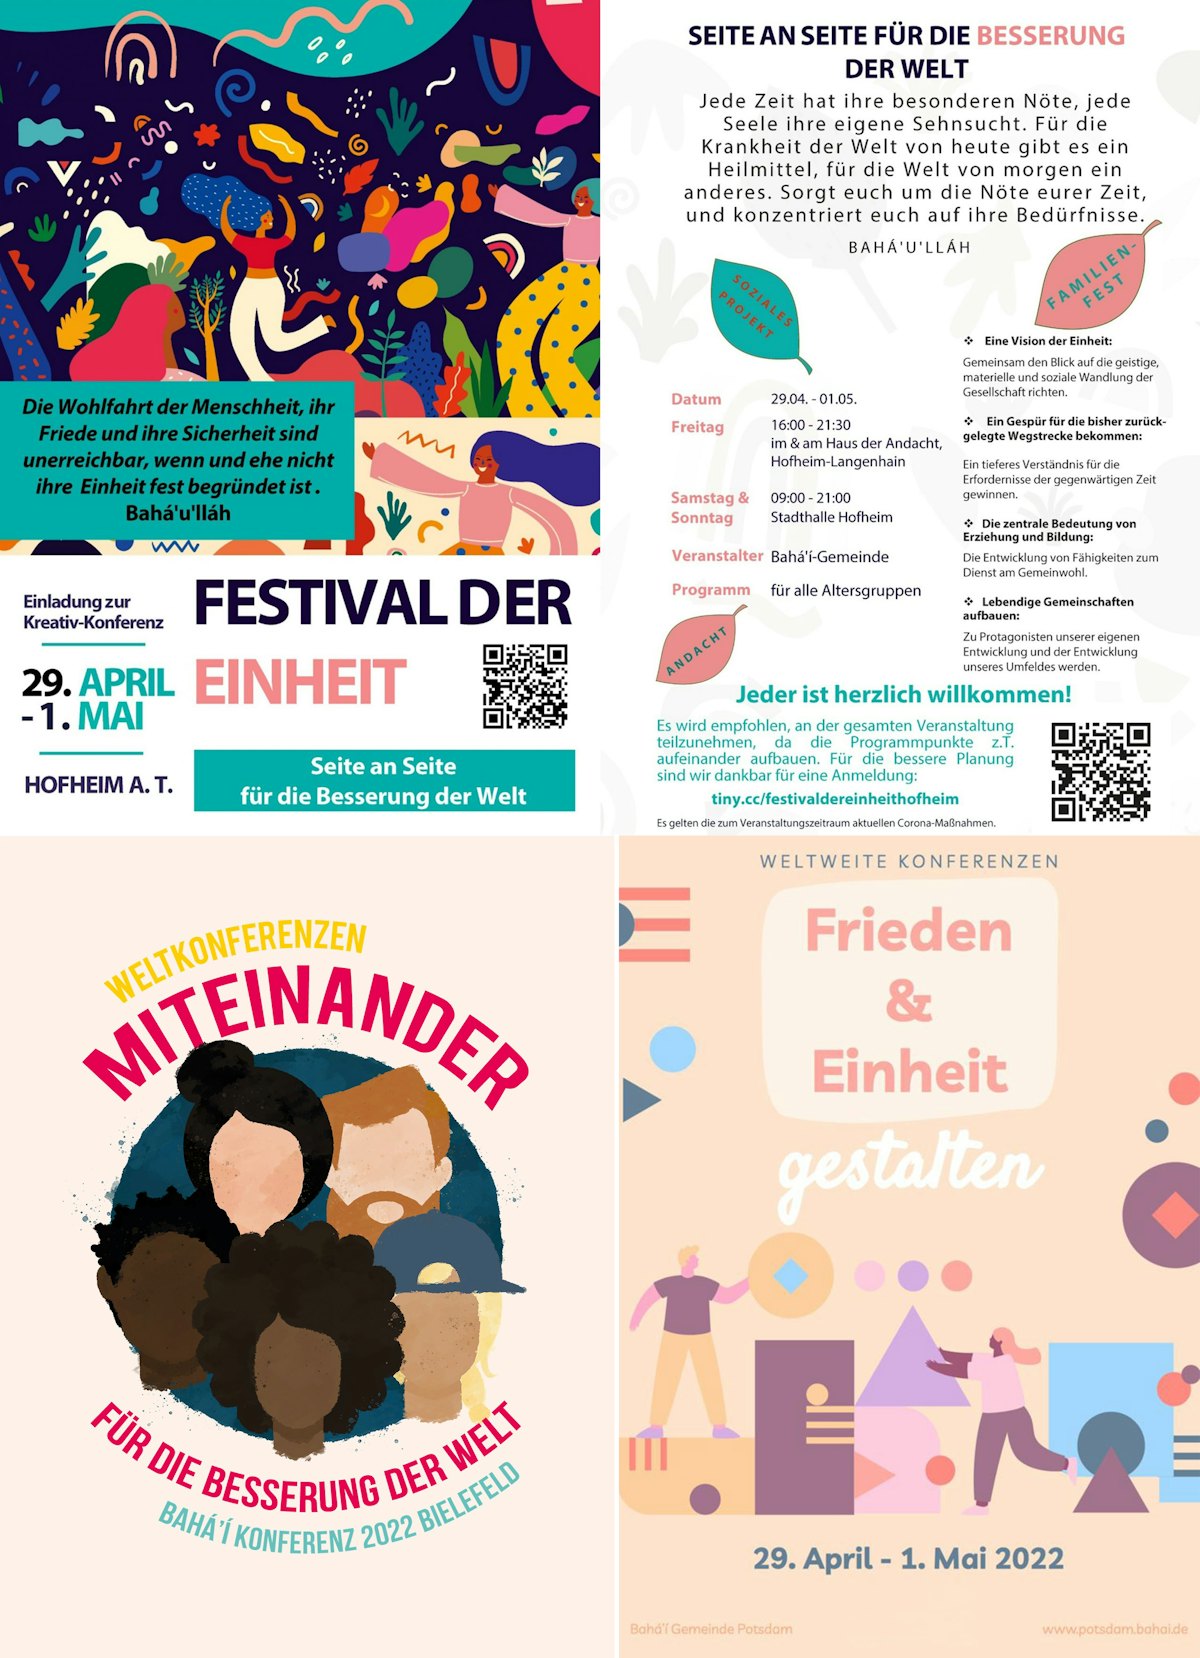 Pictured here are a series of invitations welcoming people to conferences being held in Germany.